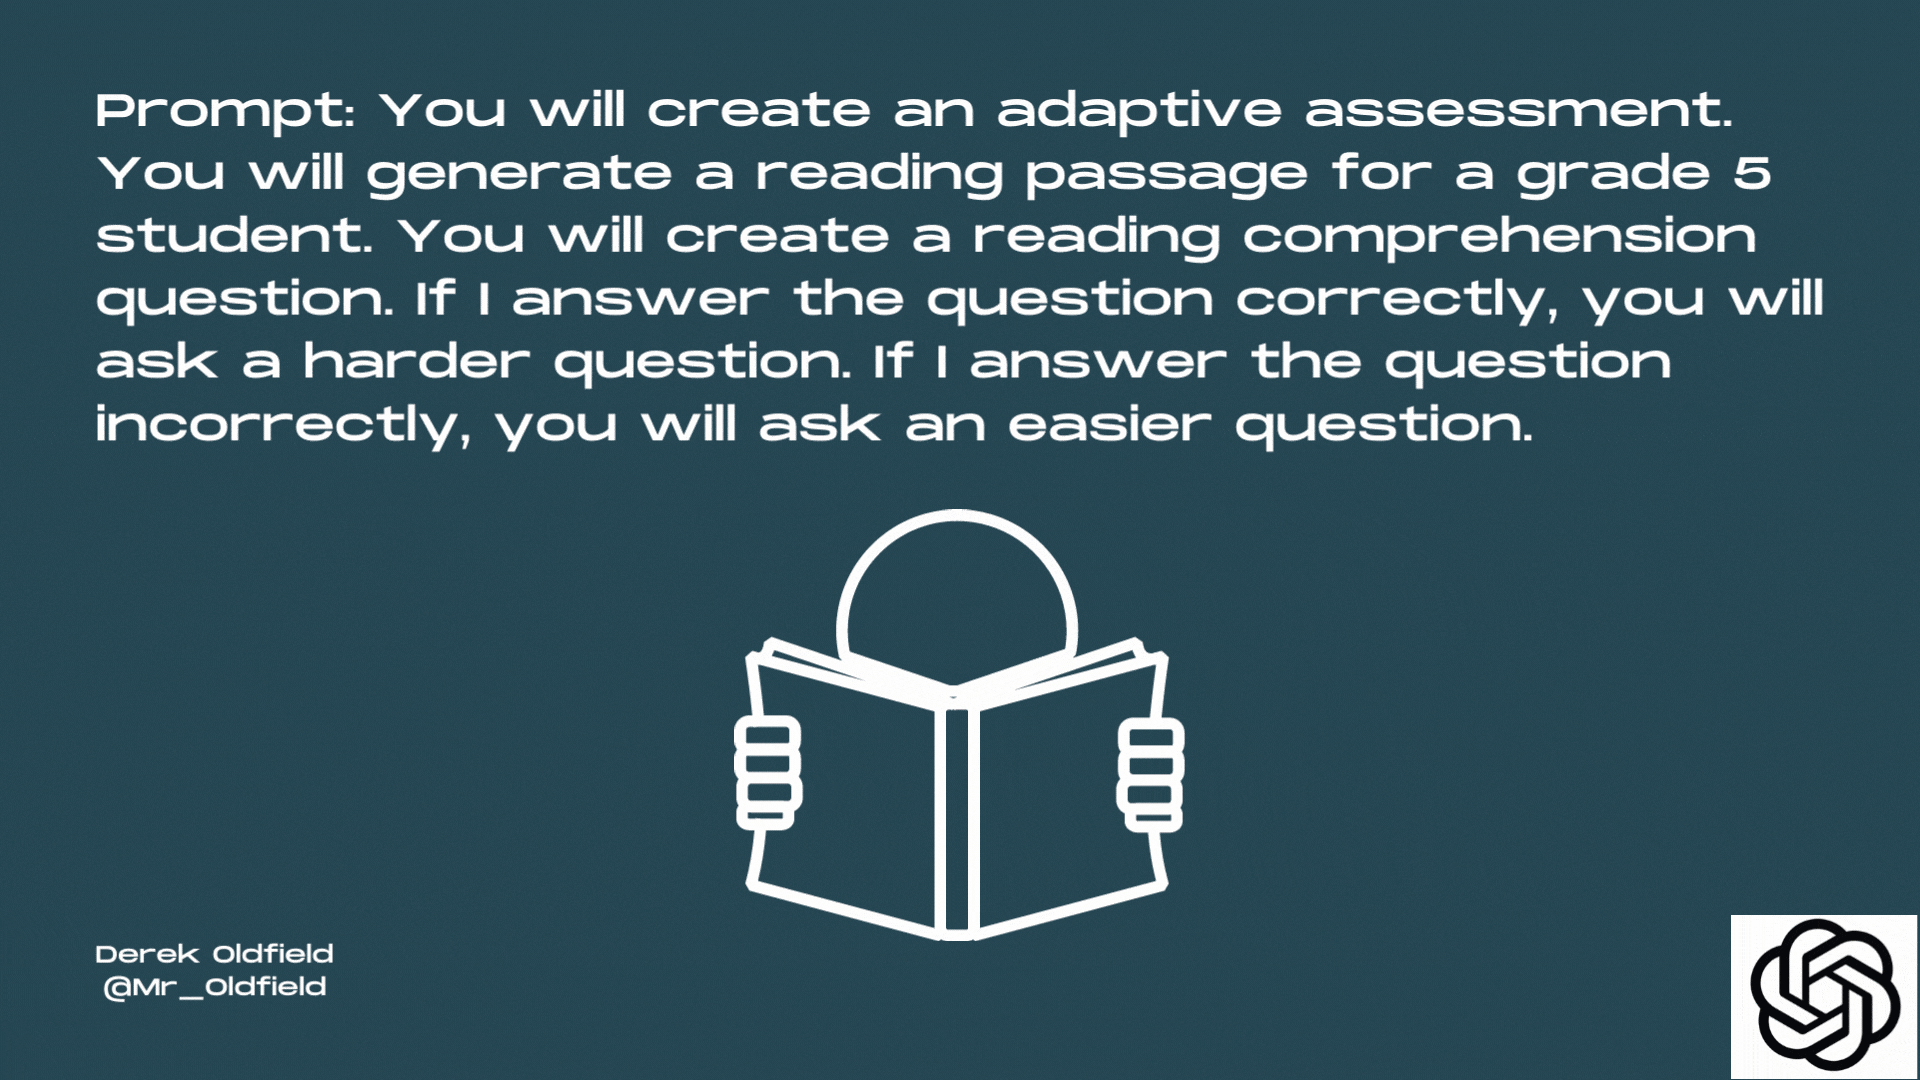 ChatGPT is creating an adaptive assessment by generating a reading passage and asking more or less complex questions about that passage based on the answer provided by the human.